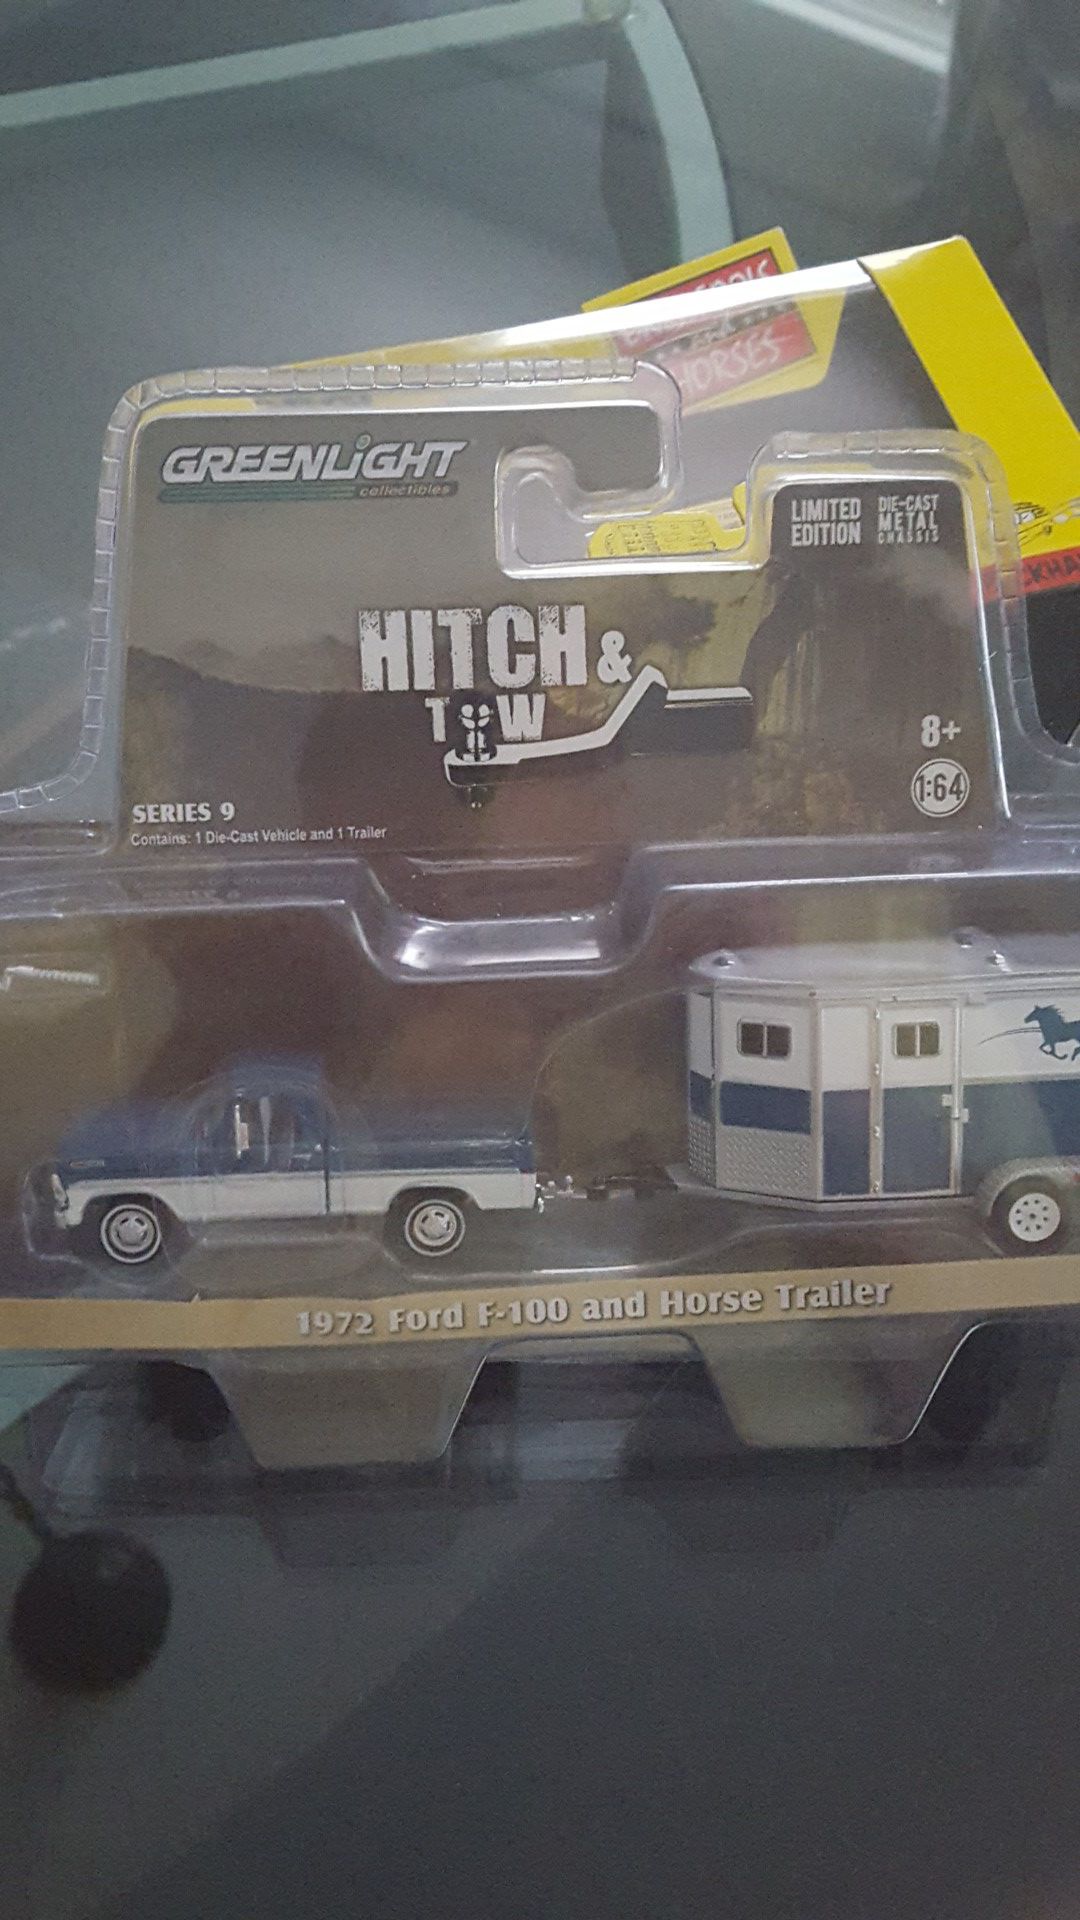 hitch & tow 1972 Ford F100 and trailer